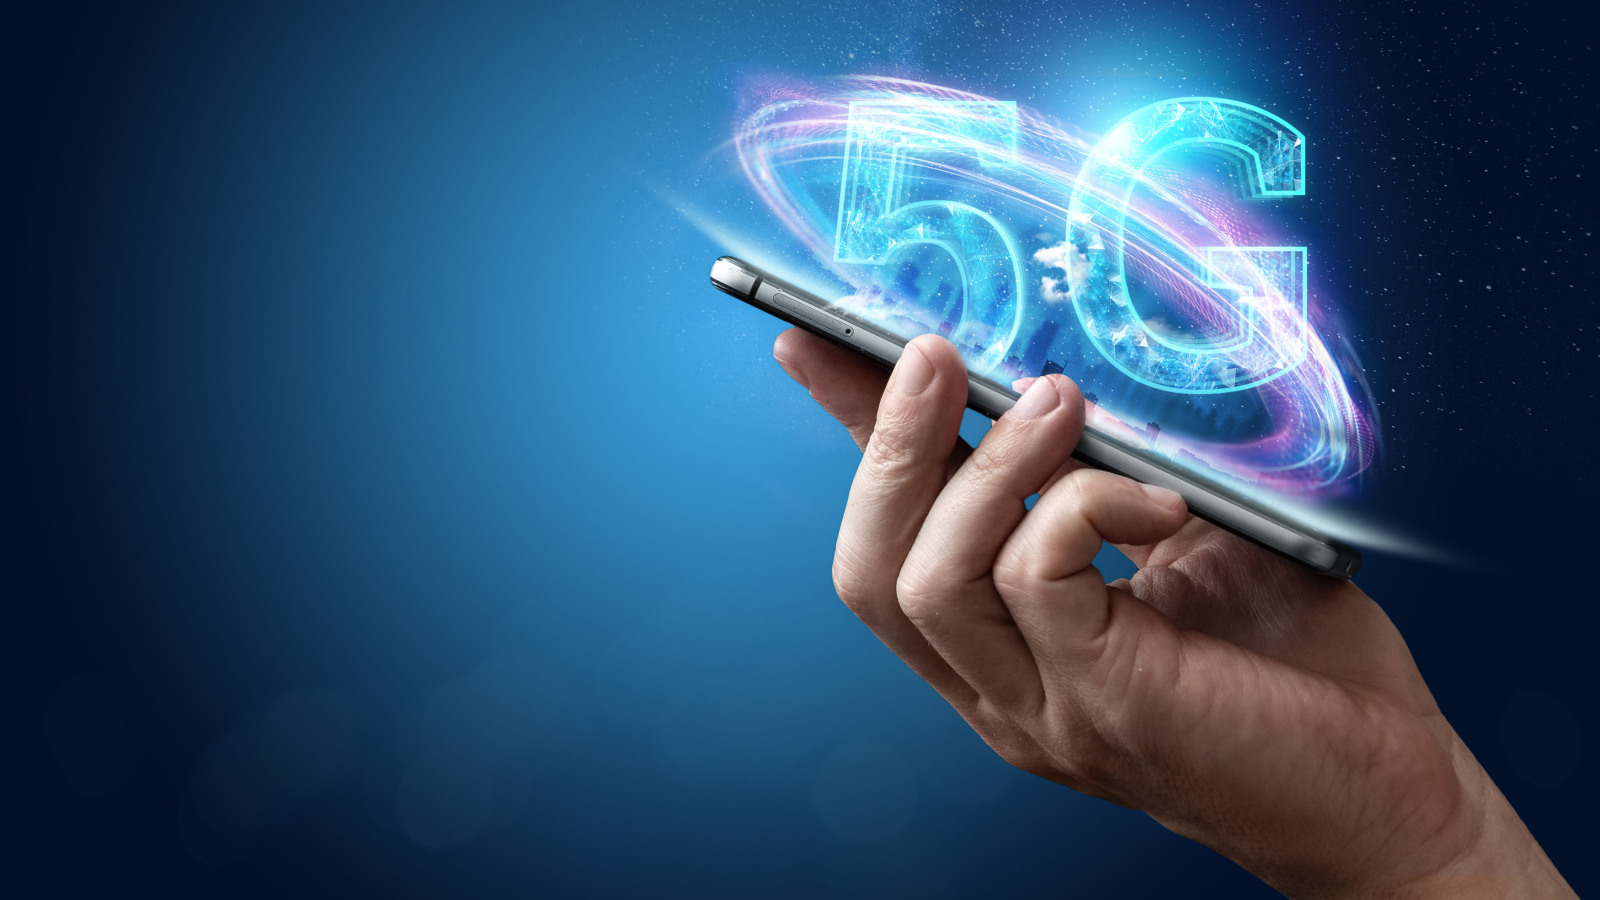 My Personal Experience with 5G